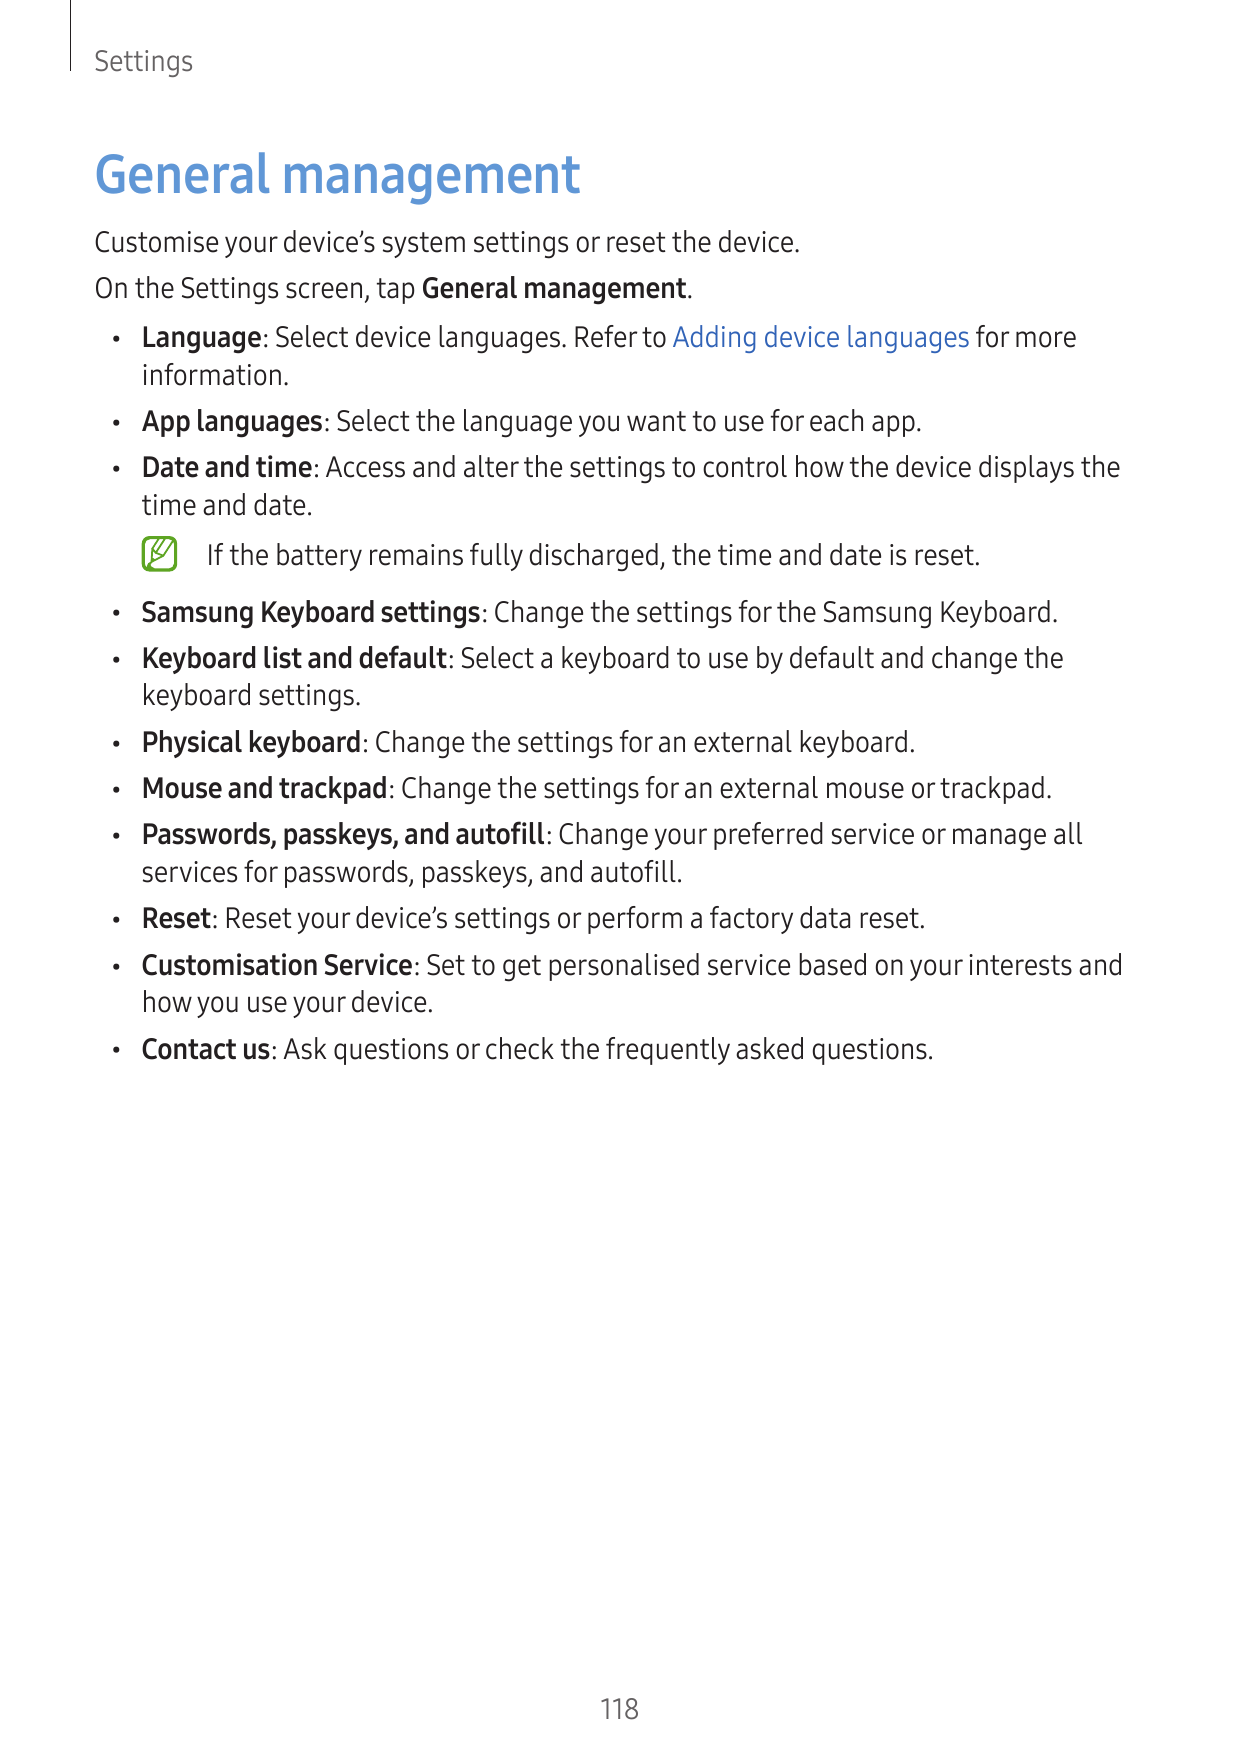 SettingsGeneral managementCustomise your device’s system settings or reset the device.On the Settings screen, tap General manage